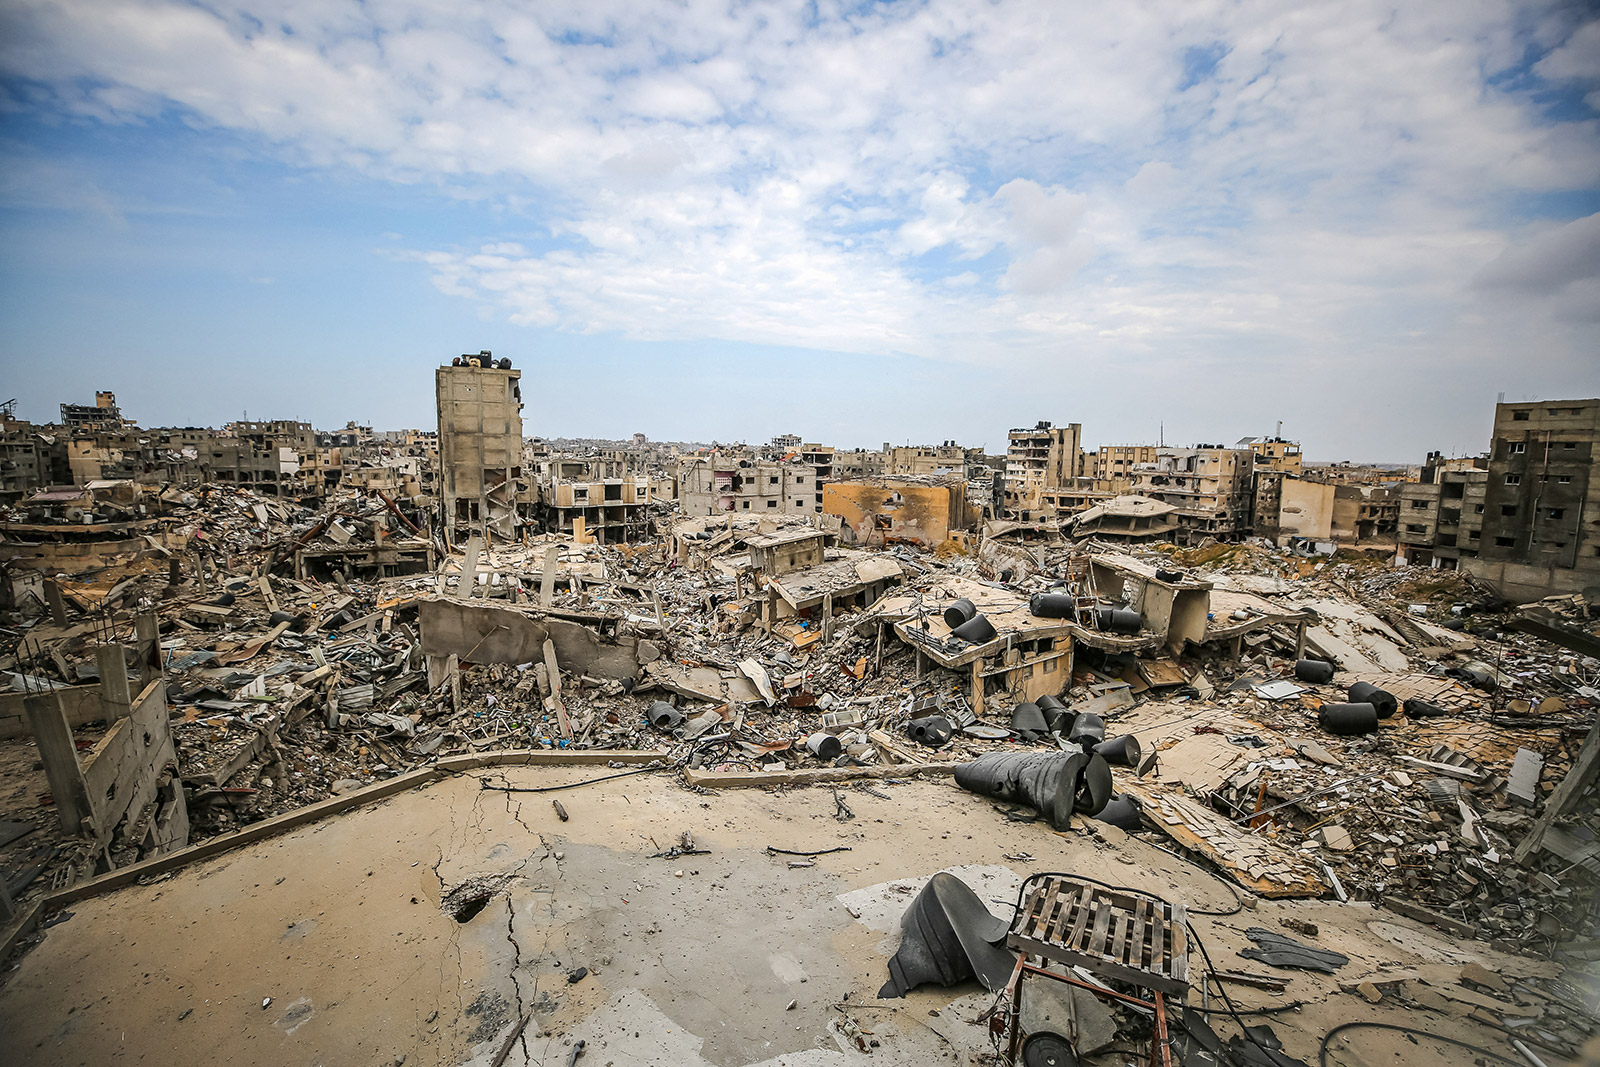 A view of the destruction in Khan Yunis after Israeli attacks on April 8.